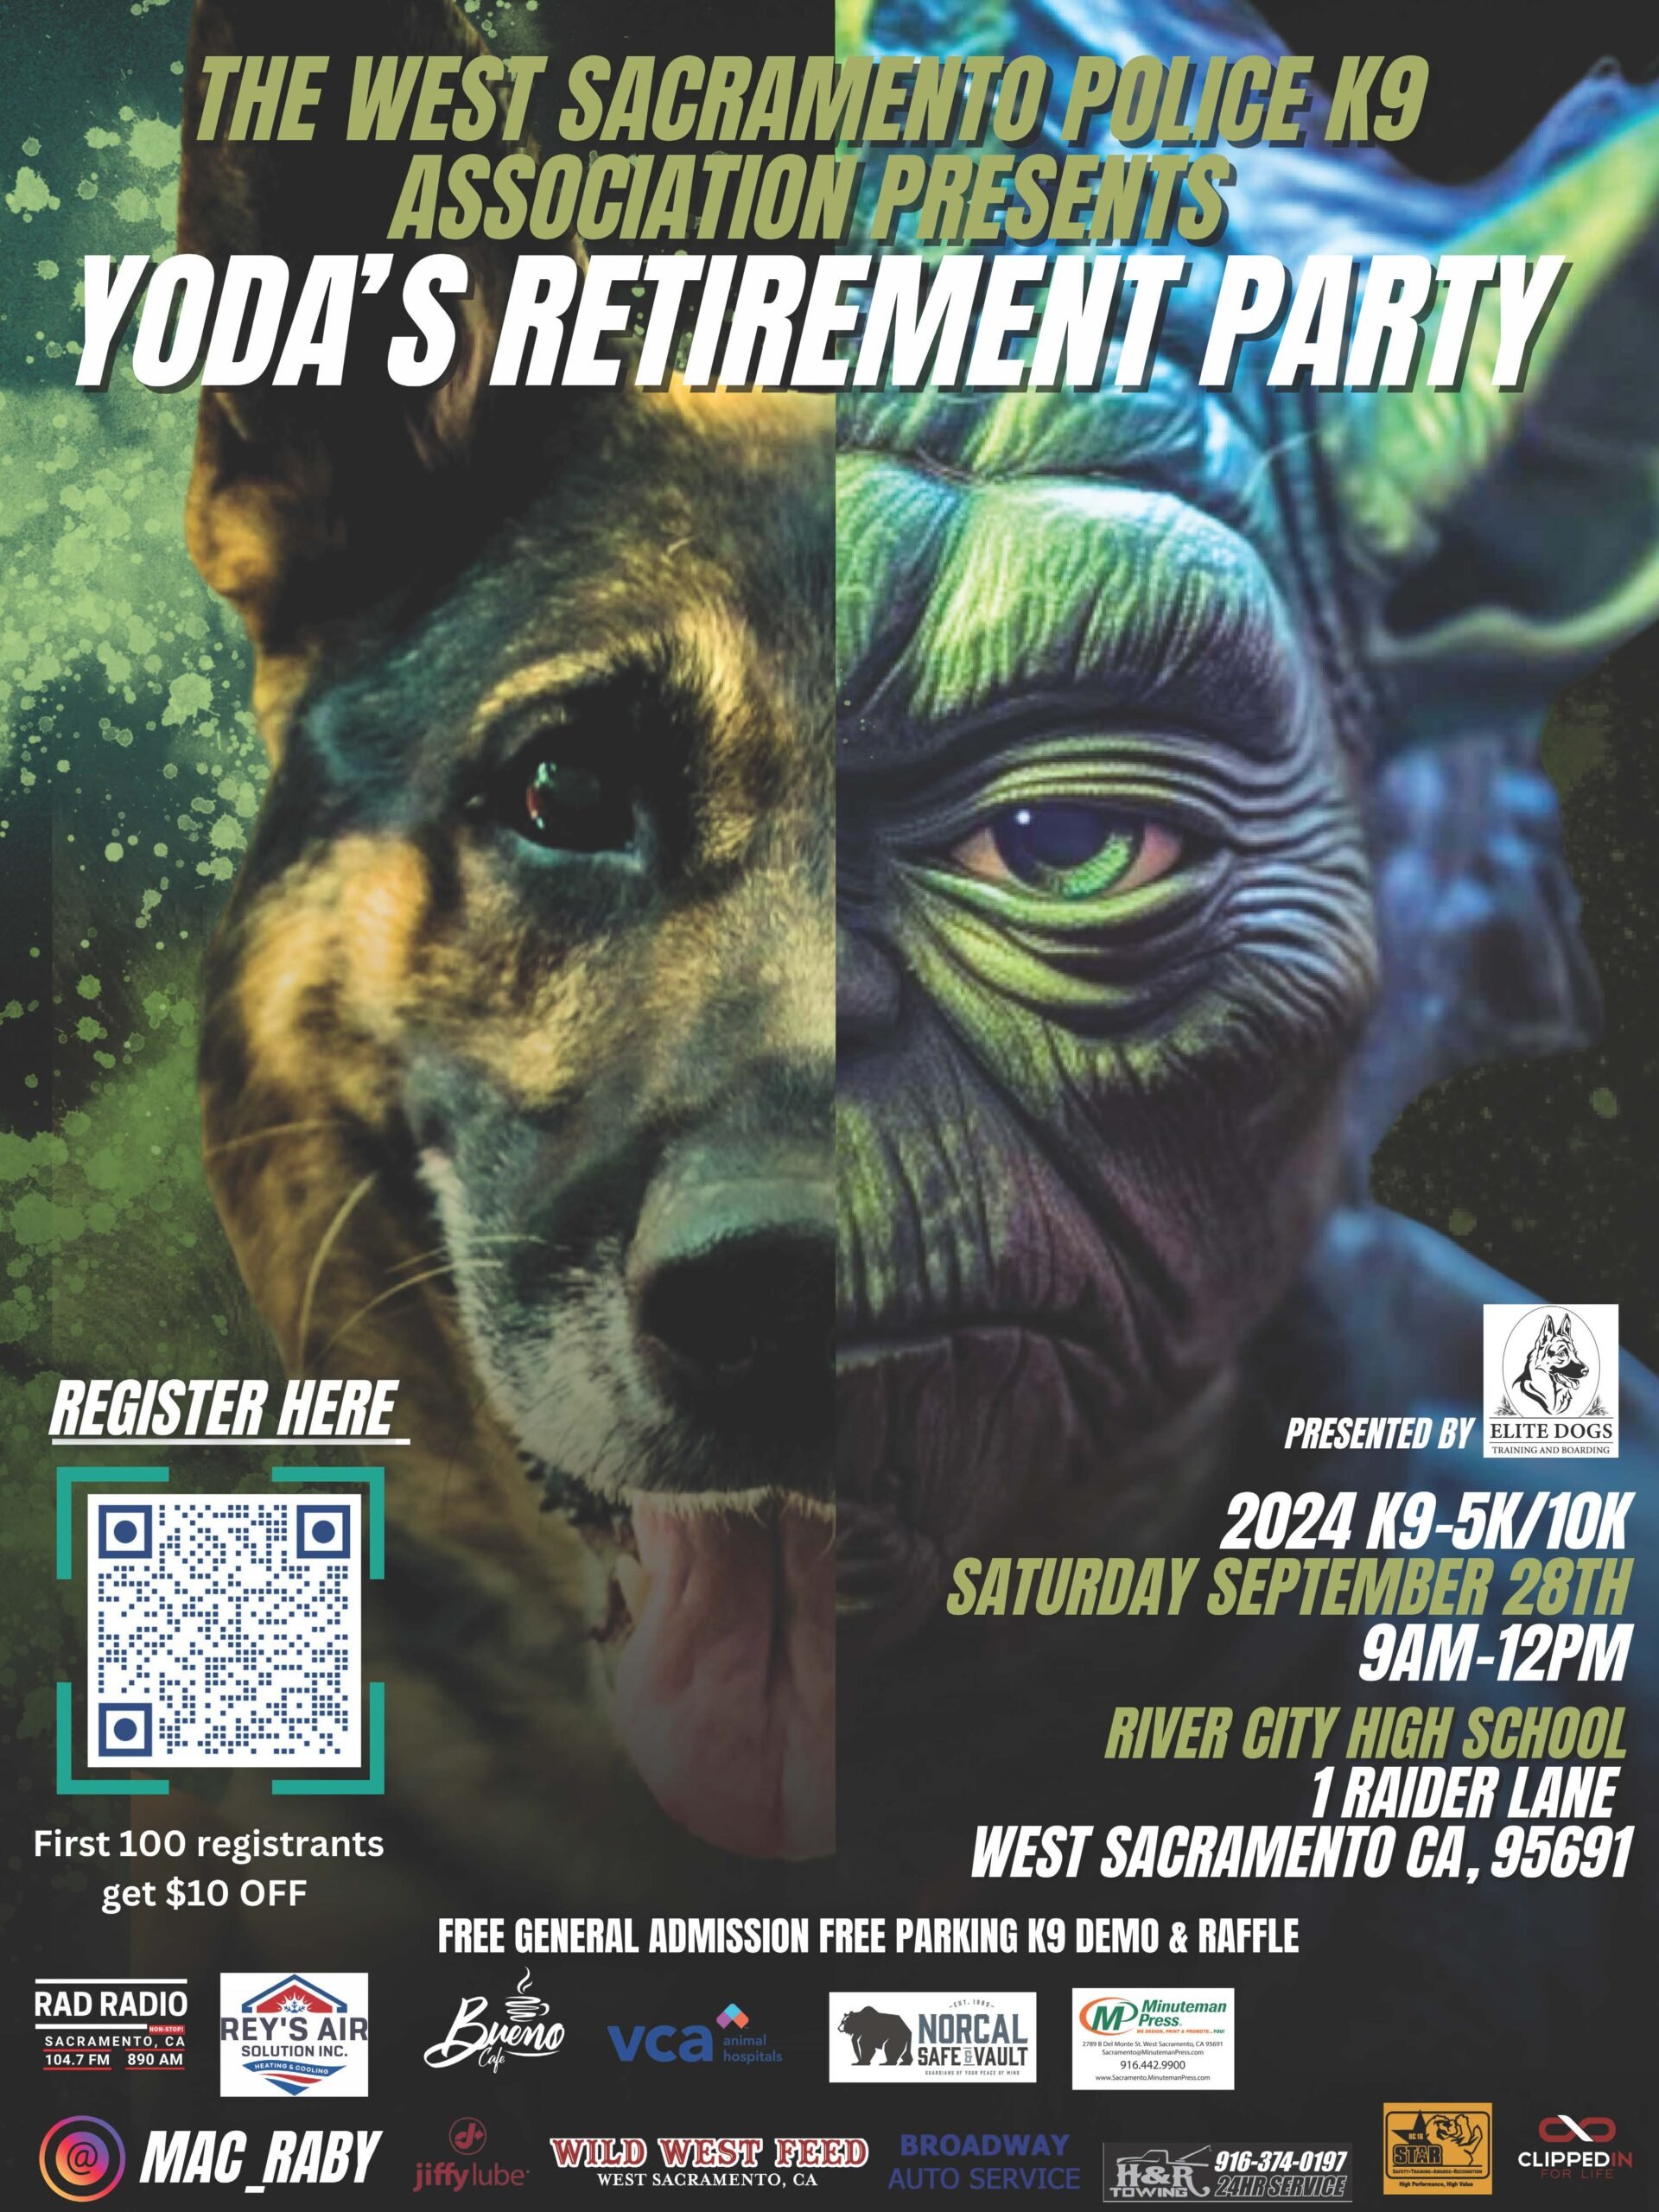 West Sac PD K9 Event